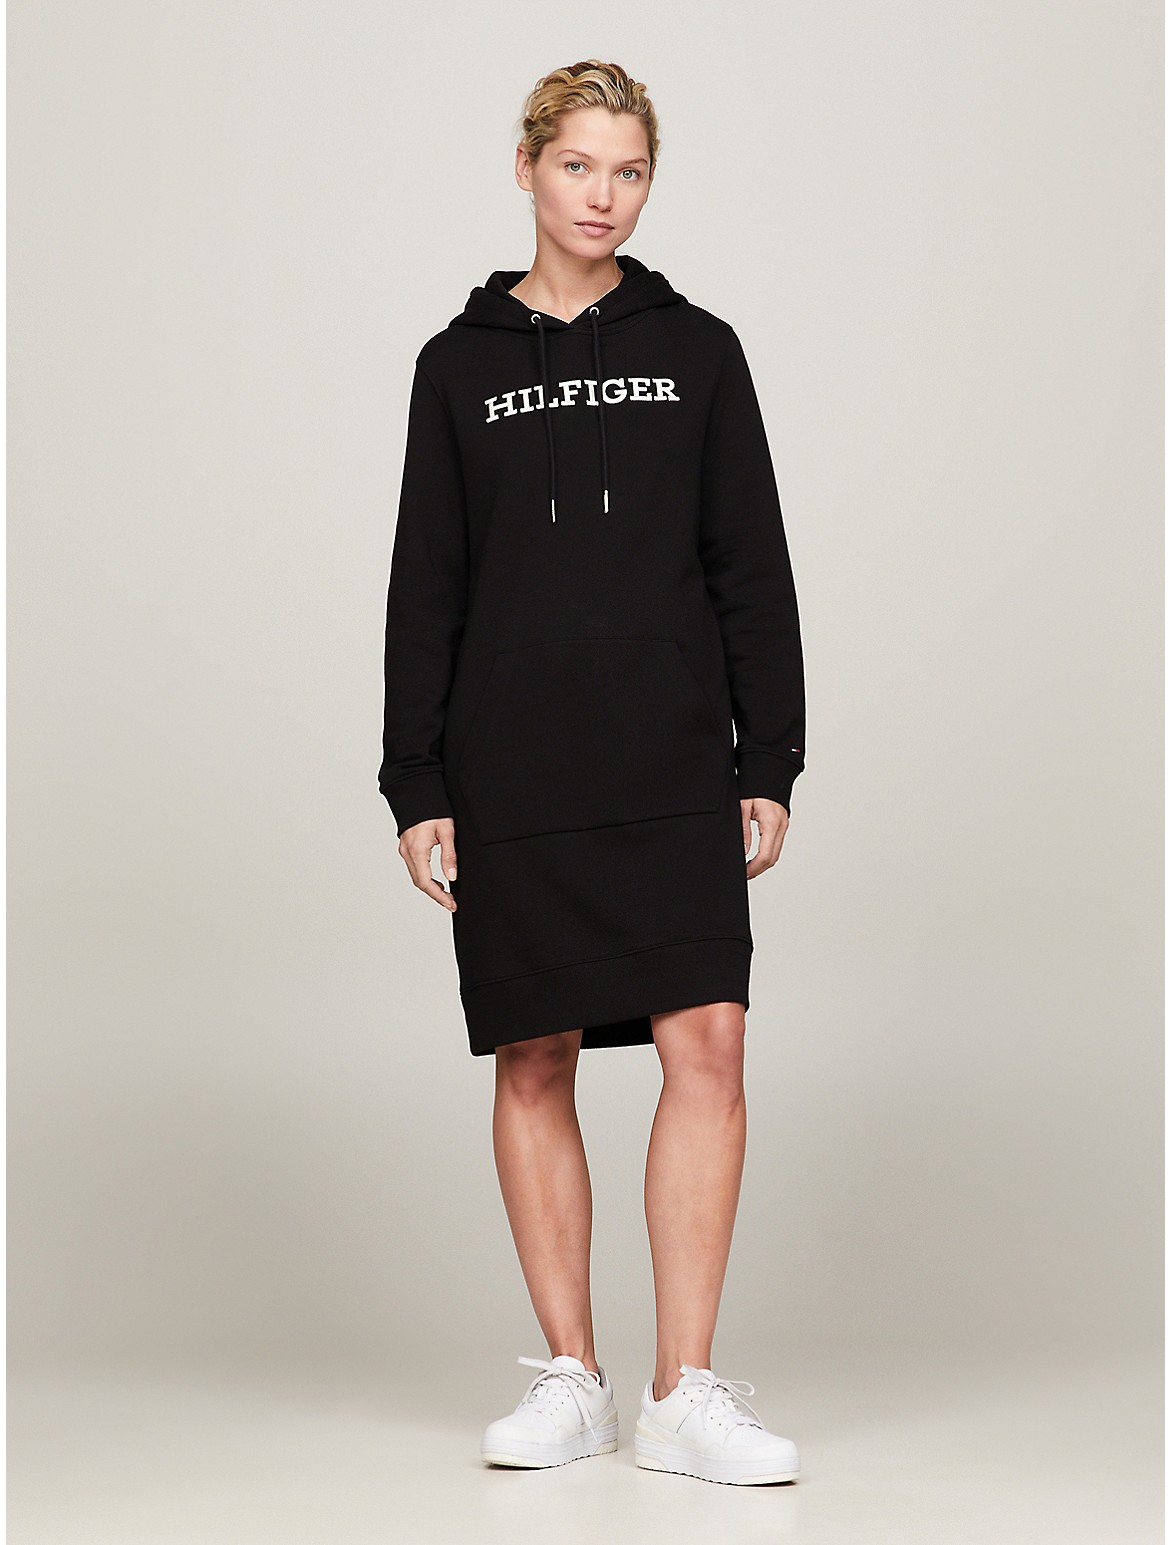 Tommy Hilfiger Women's Embroidered Monotype Hoodie Dress